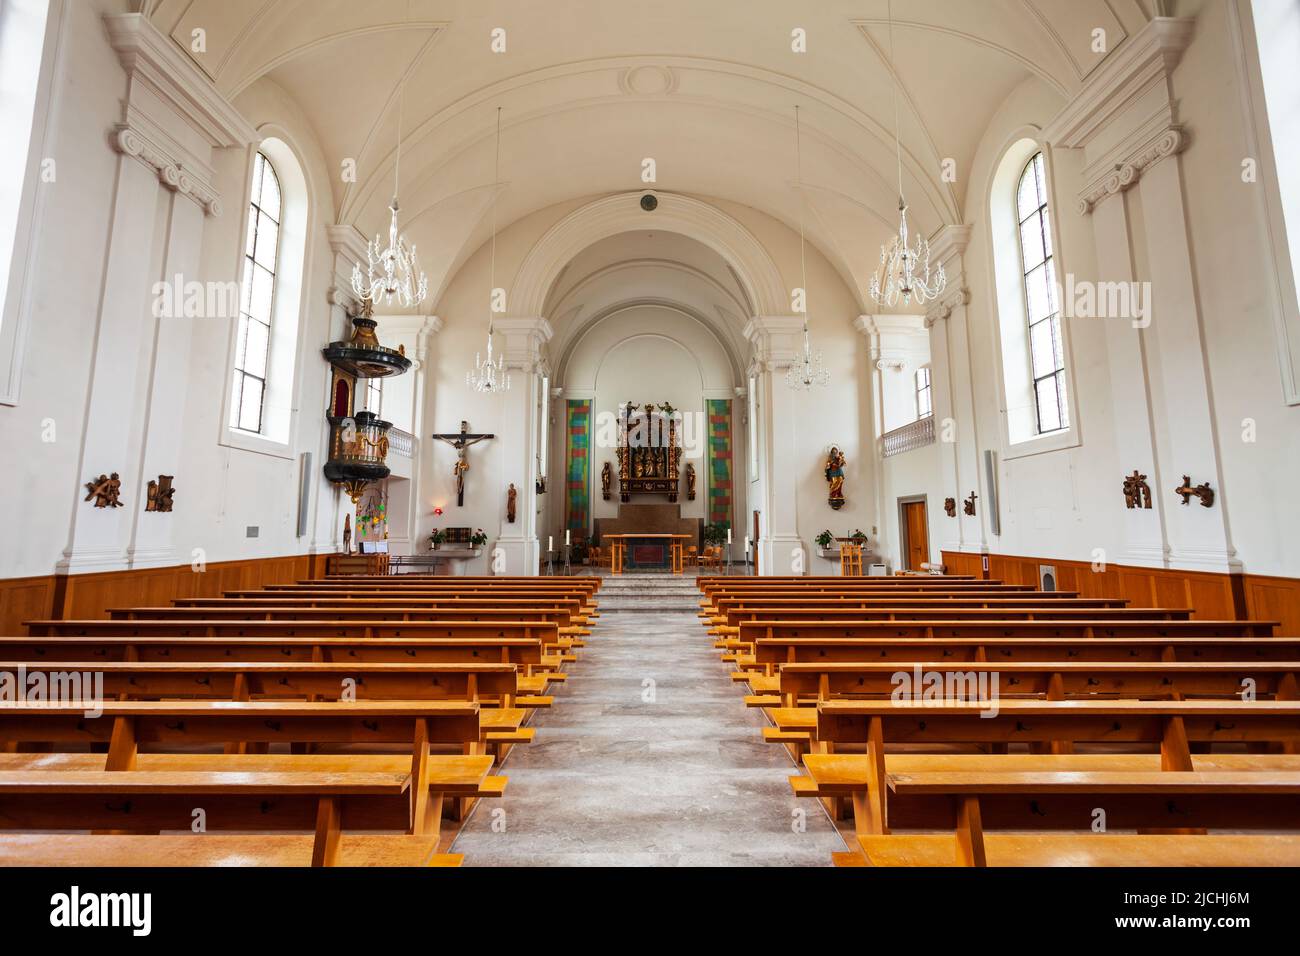 WEGGIS, SWITZERLAND - JULY 12, 2019: The Parish of St. Mary Church in Weggis, a town on the shore of Lake Lucerne in the canton of Luzern in Switzerla Stock Photo